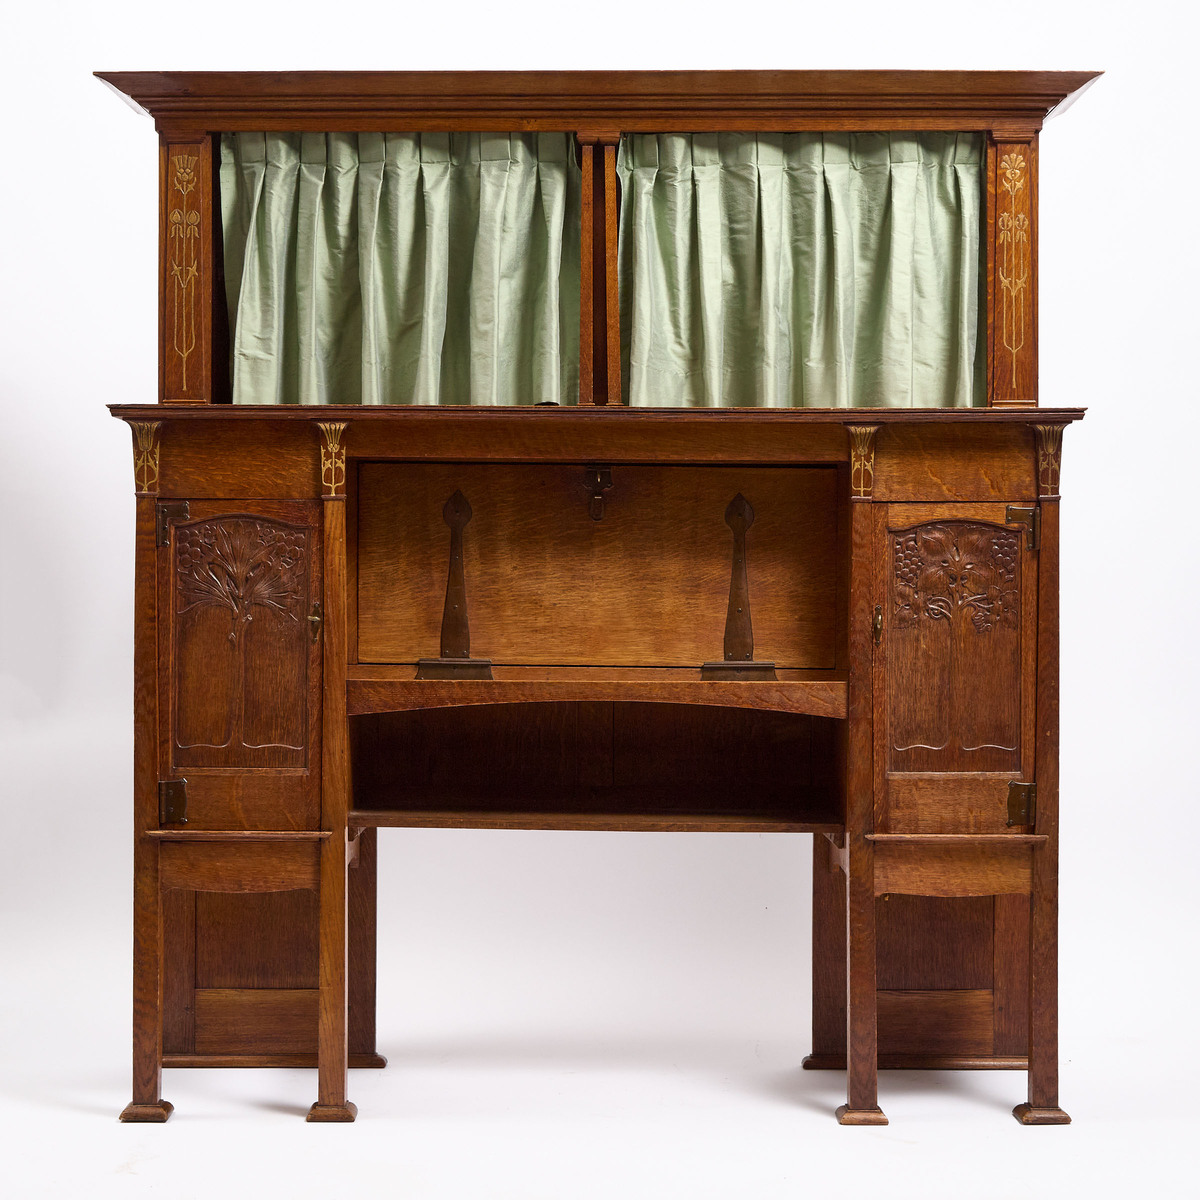 Alfred Wickham Jarvis Arts and Crafts Secretaire Bookcase, c.1898, 69.75 x 35.5 x 16 in — 177.2 x 90